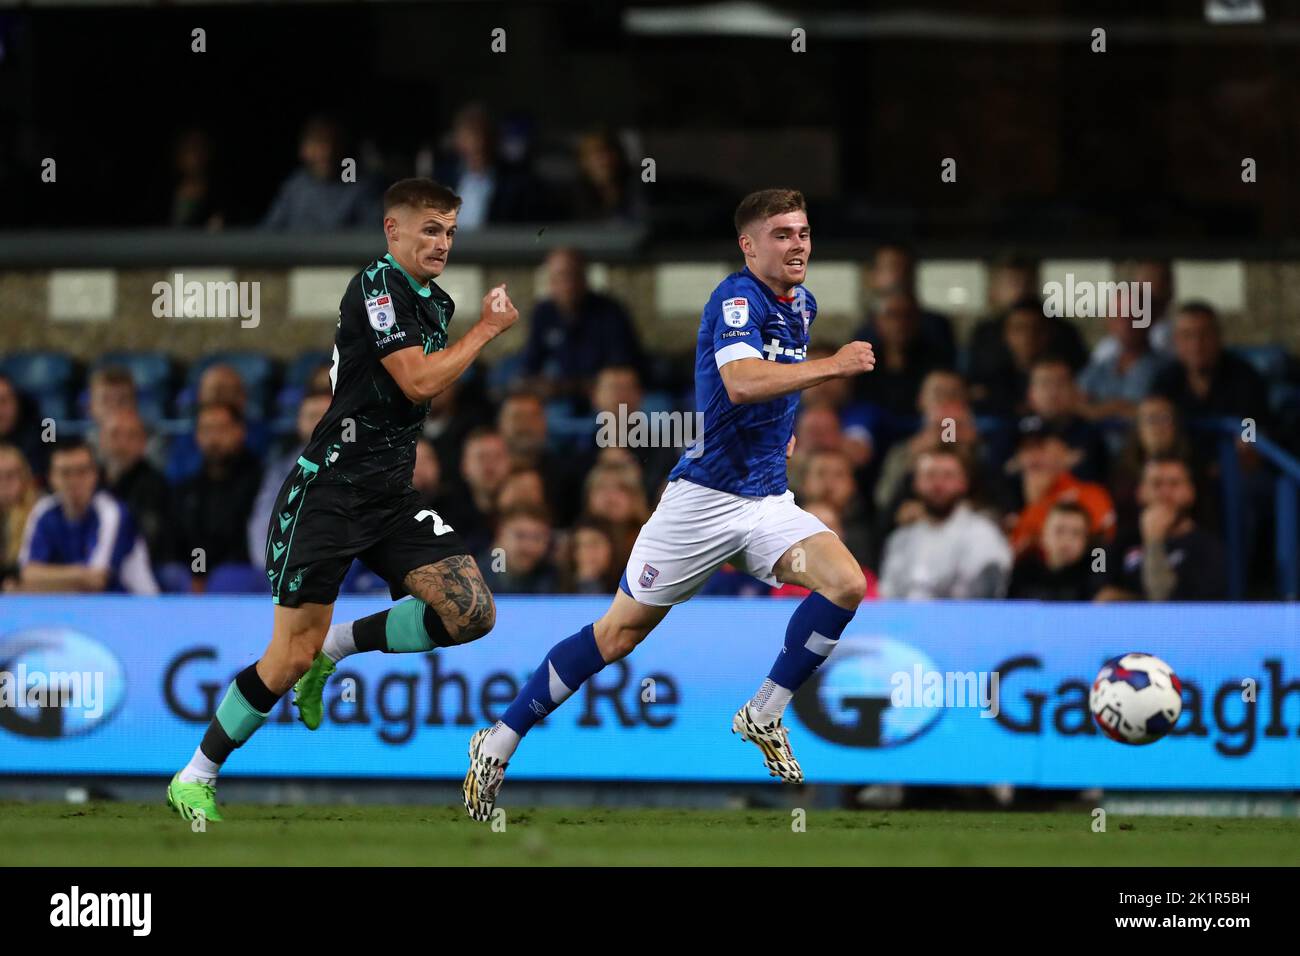 Leif Davis of Ipswich Town and Harvey Saunders of Bristol Rovers - Ipswich Town v Bristol Rovers, Sky Bet League One, Portman Road, Ipswich, UK - 13th September 2022  Editorial Use Only - DataCo restrictions apply Stock Photo